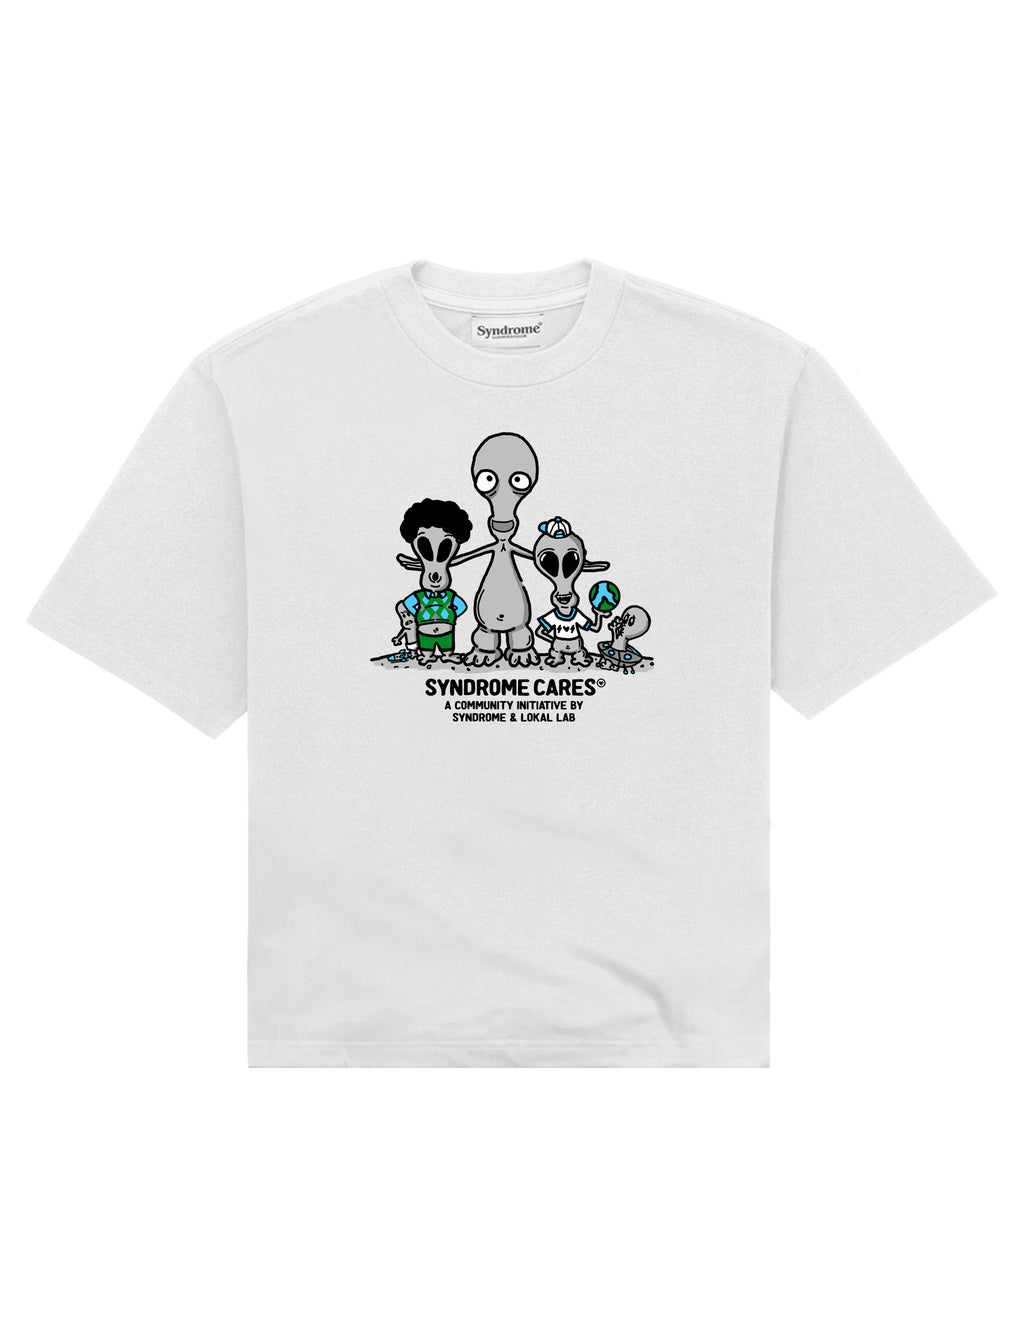 Our World Tee